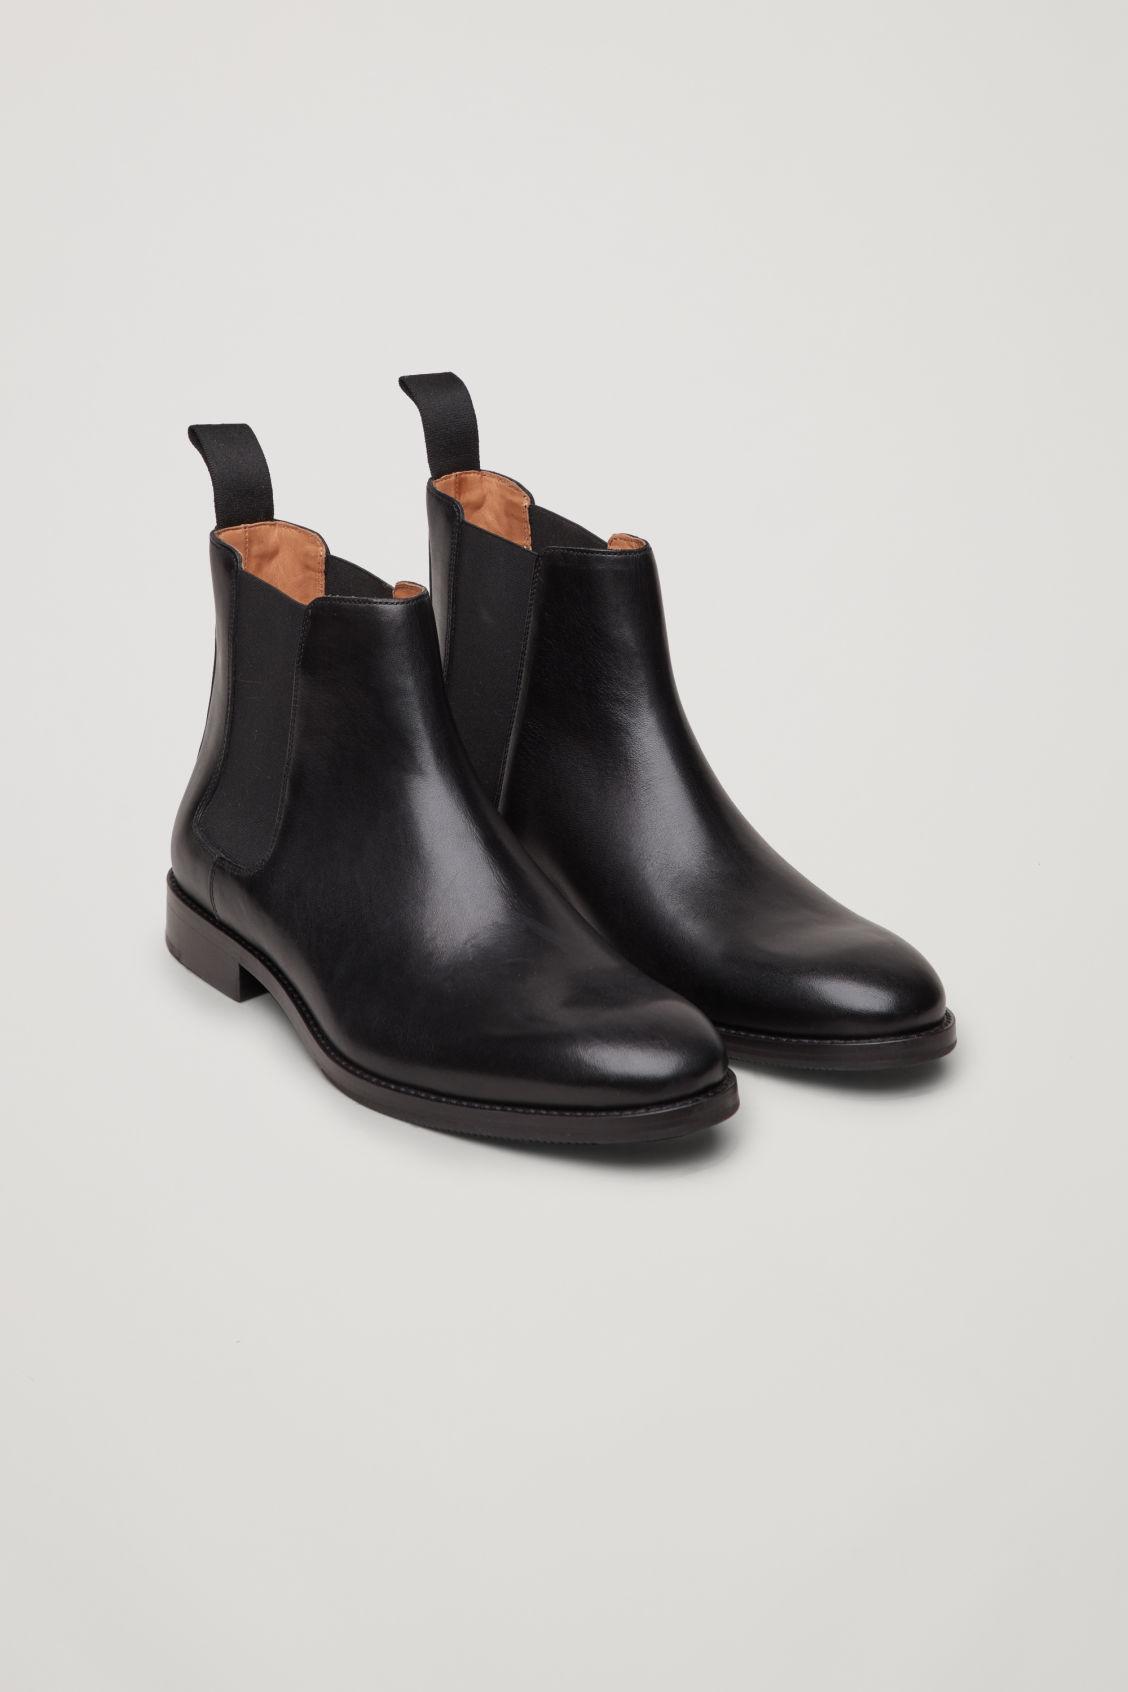 COS Leather Chelsea Boots in Black for 